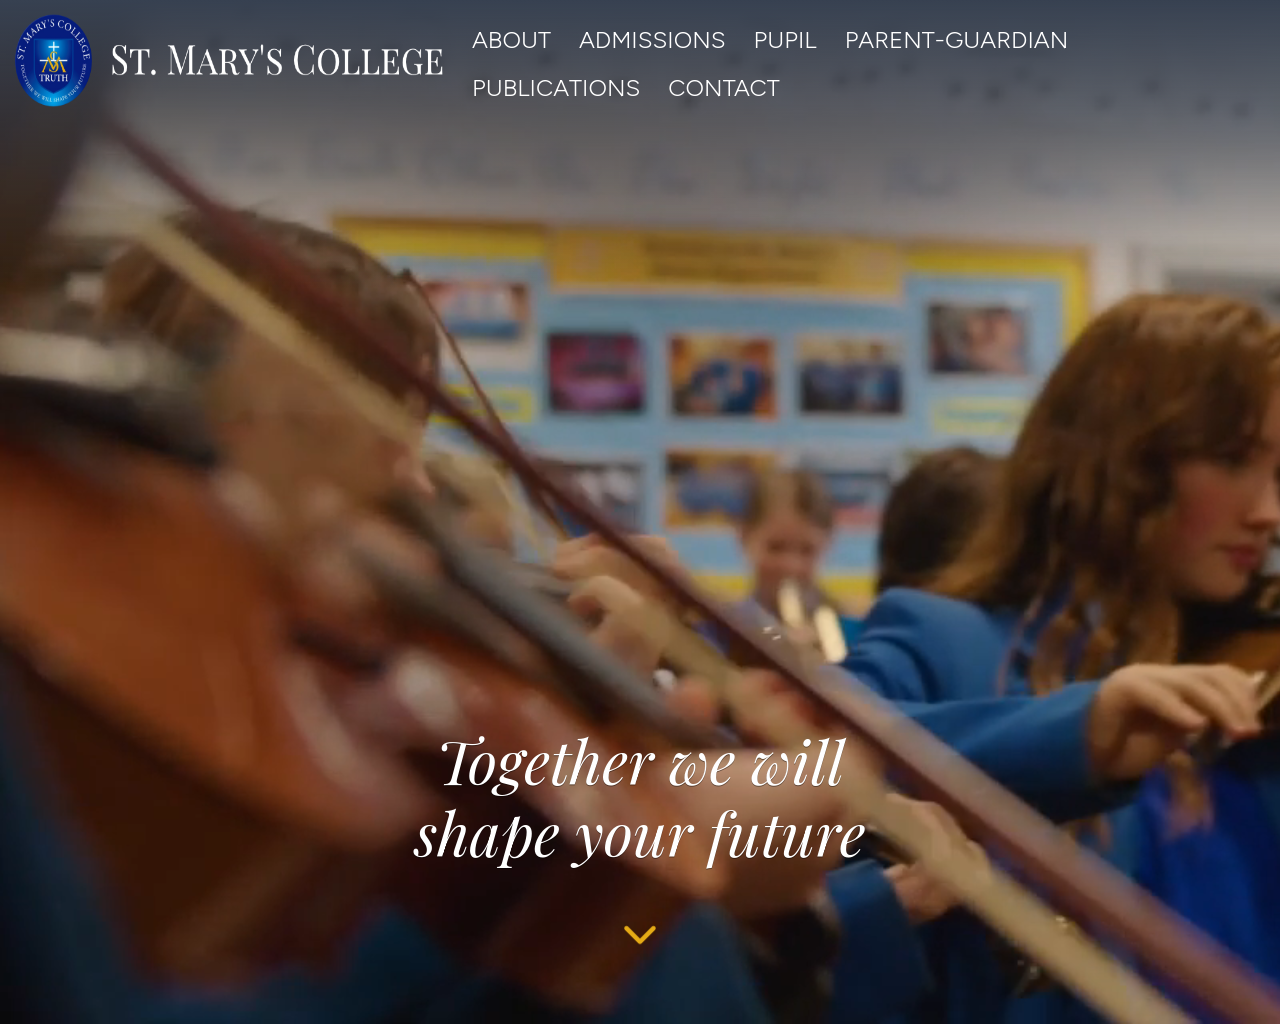 St. Mary's College Website